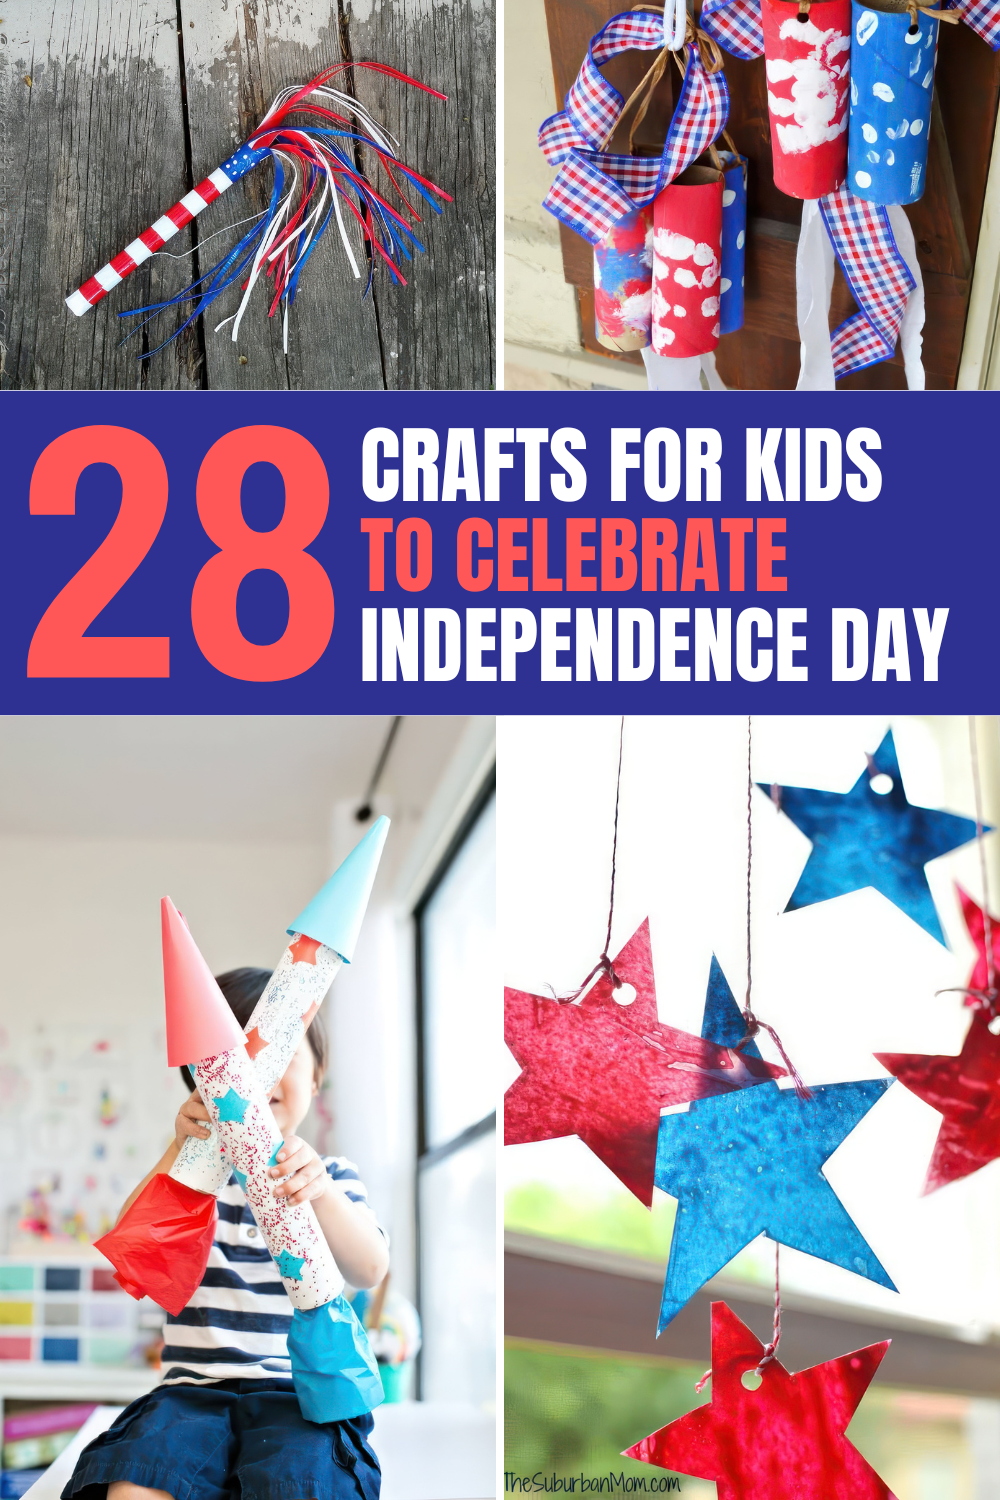 Celebrate the 4th of July with these easy and fun crafts that kids will love! Our red, white, and blue projects are perfect for adding a festive touch to your holiday. Tap to see all the creative ideas and start crafting! 🎨🖍️